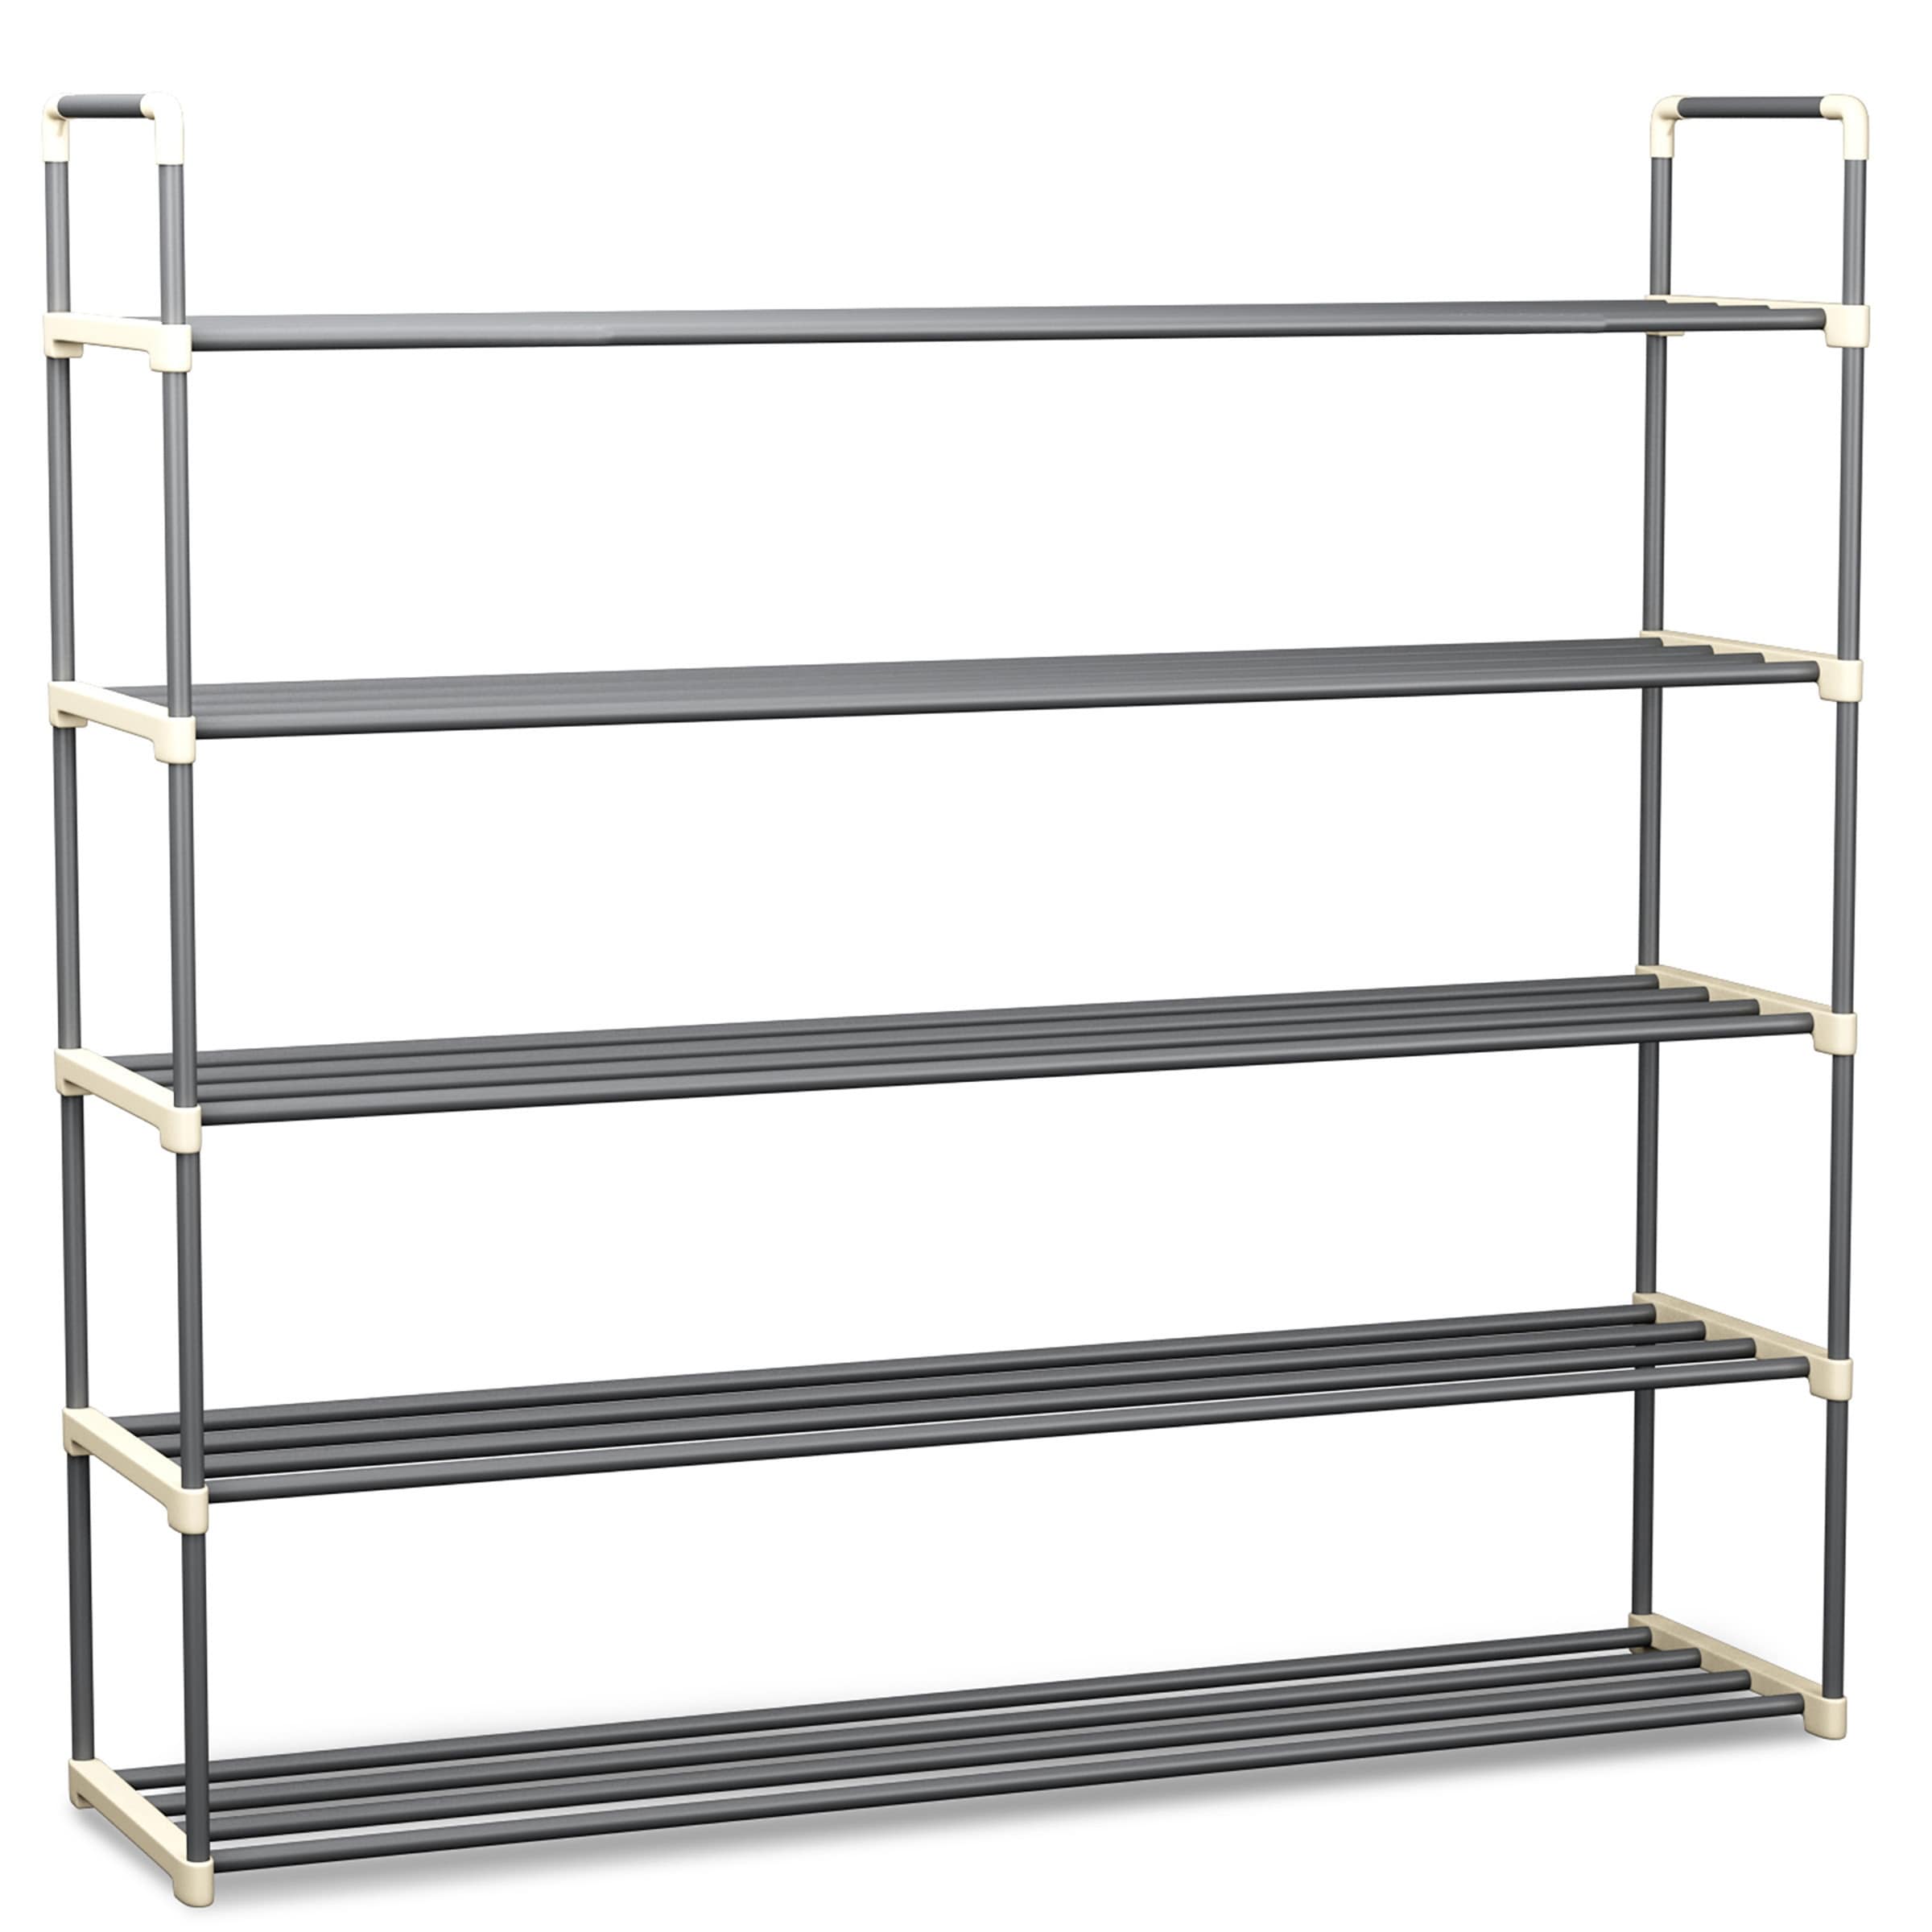 https://ak1.ostkcdn.com/images/products/is/images/direct/9f11ec7297176b9efafb9ab3e4a0481689889f6b/Hastings-Home-Multi-Tier-Shoe-Storage-Rack.jpg